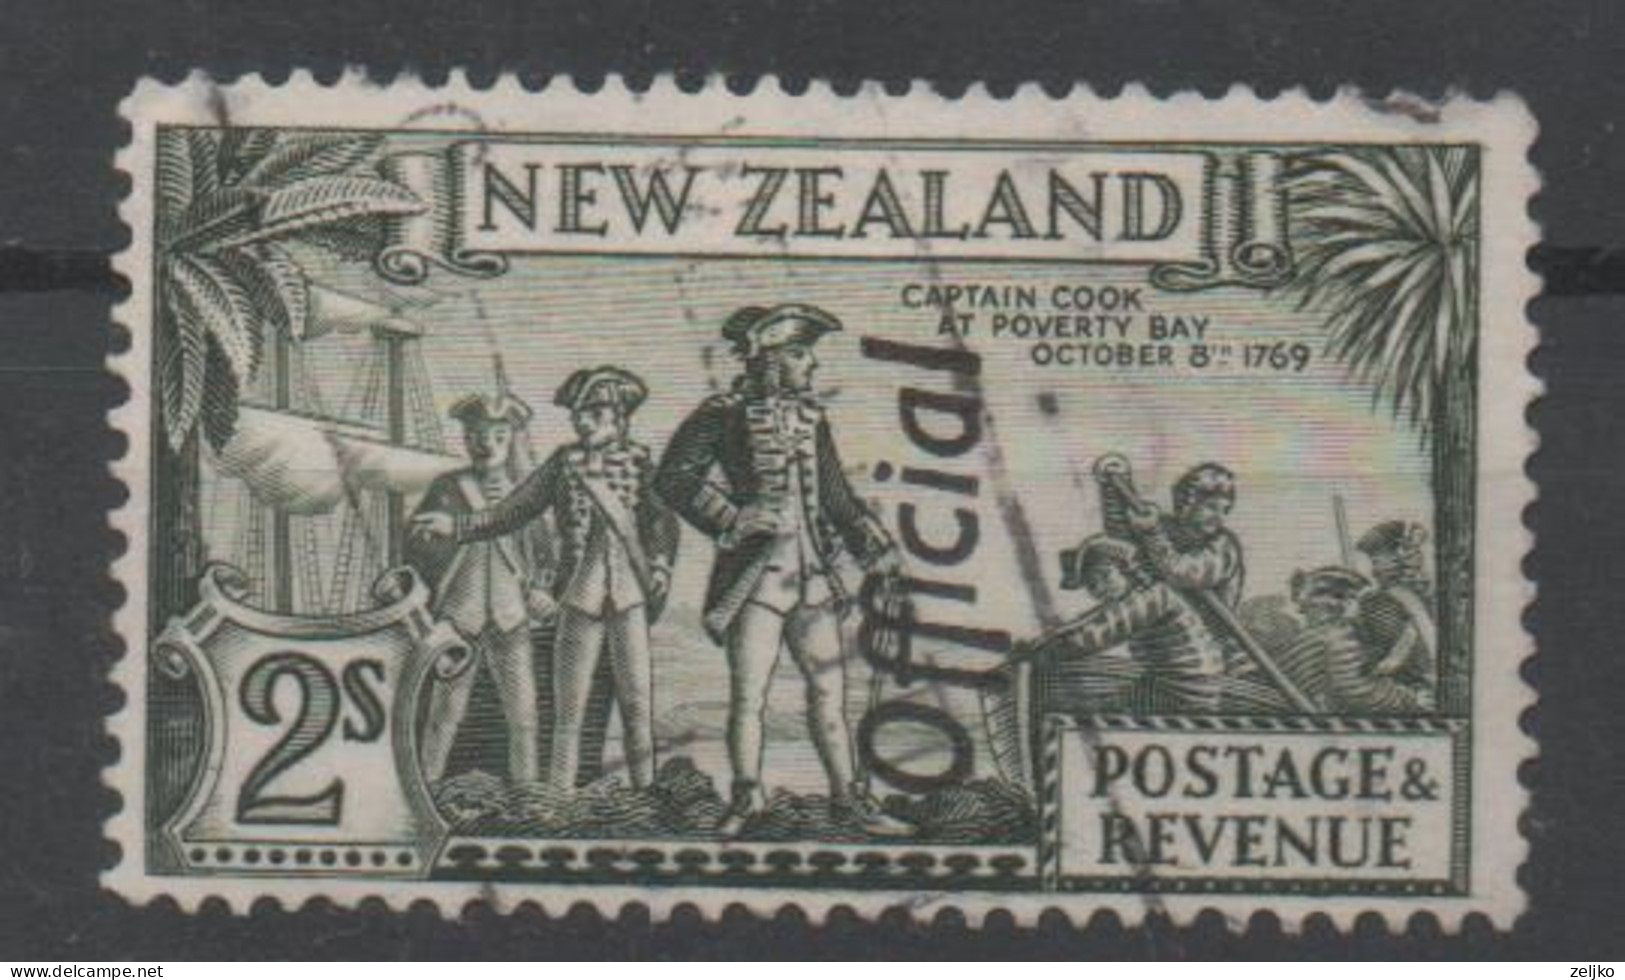 New Zealand, Used, Official, Michel 51D, Captain Cook At Poverty Bay - Used Stamps